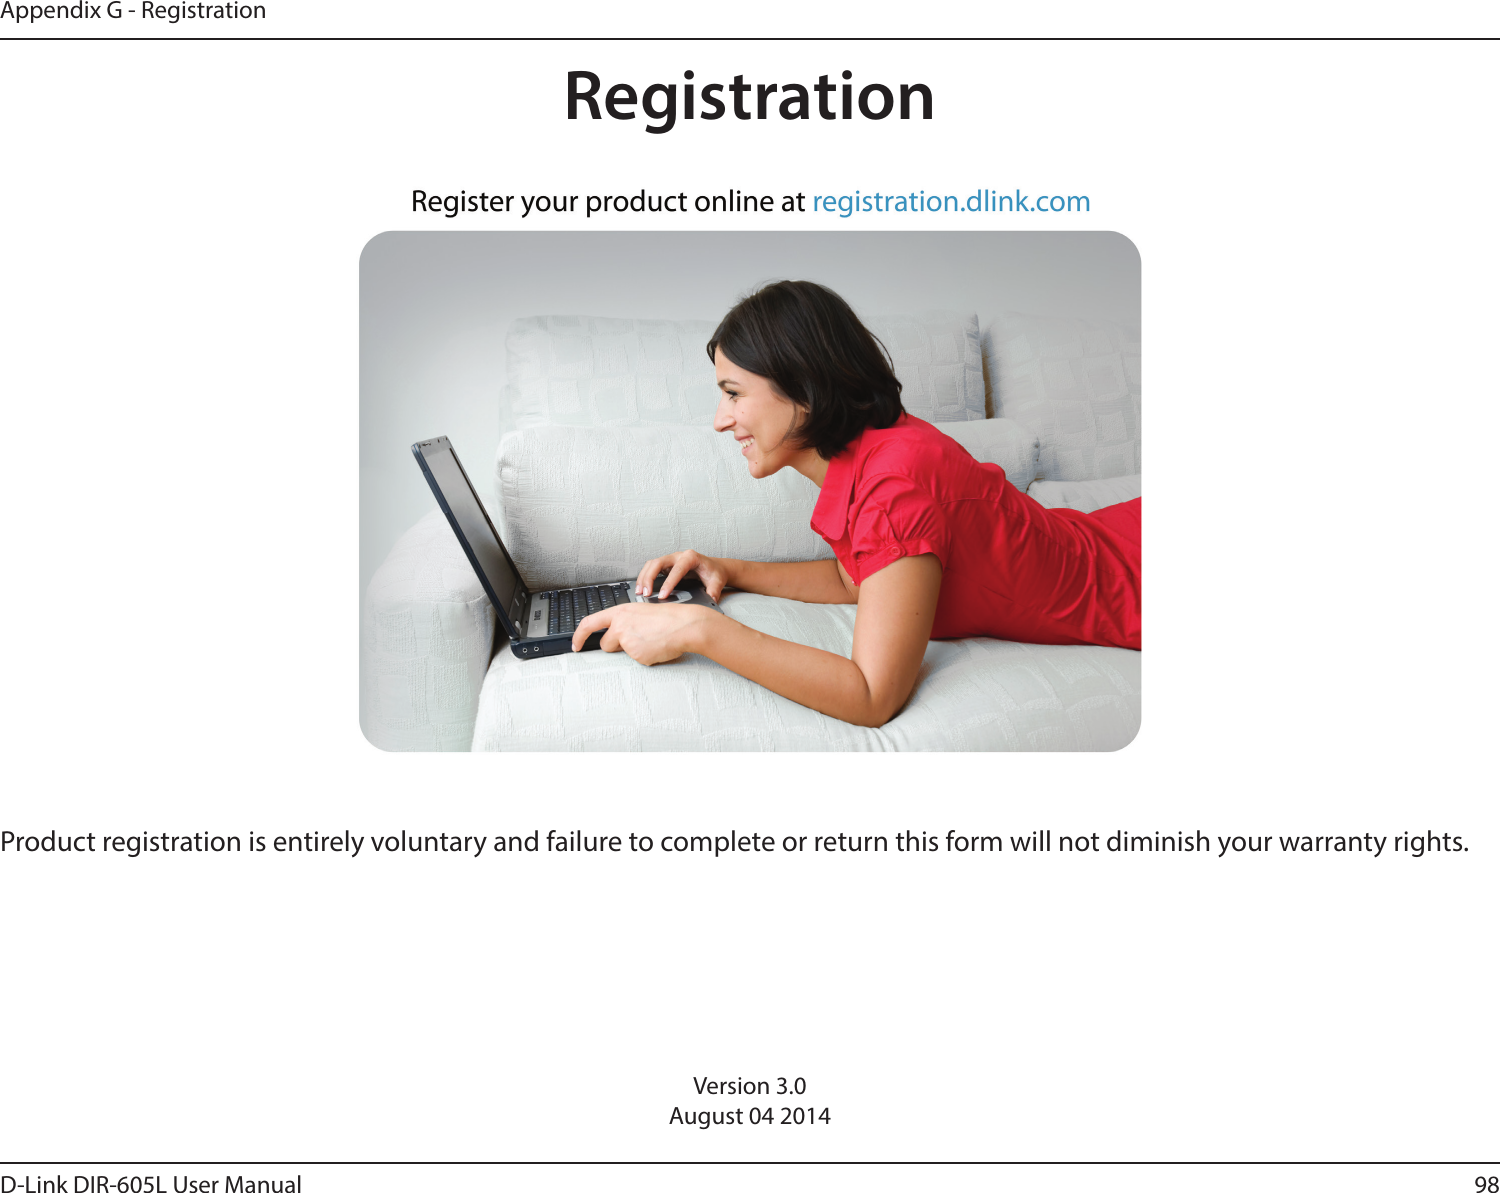 98D-Link DIR-605L User ManualAppendix G - RegistrationVersion 3.0August 04 2014Product registration is entirely voluntary and failure to complete or return this form will not diminish your warranty rights.Registration